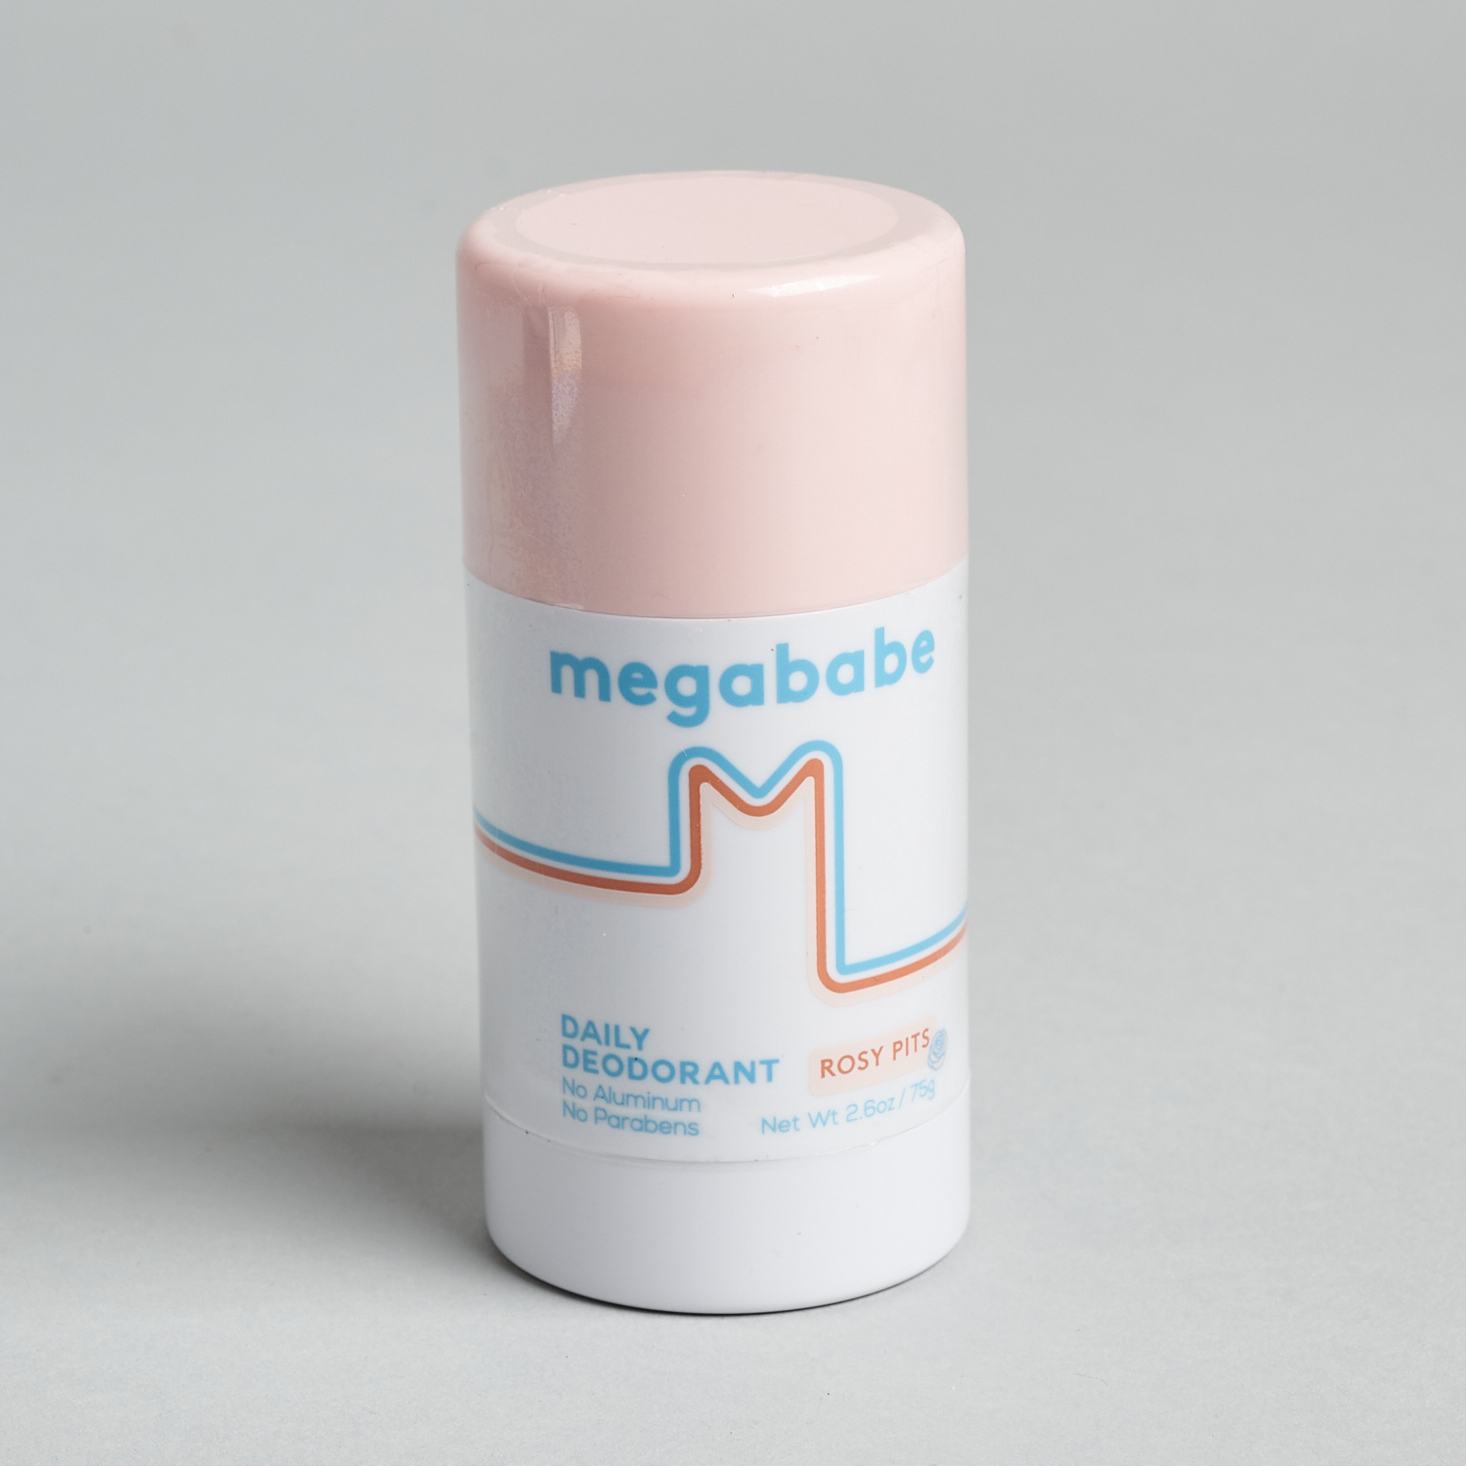 Megababe Rosy Pits Deodorant Review